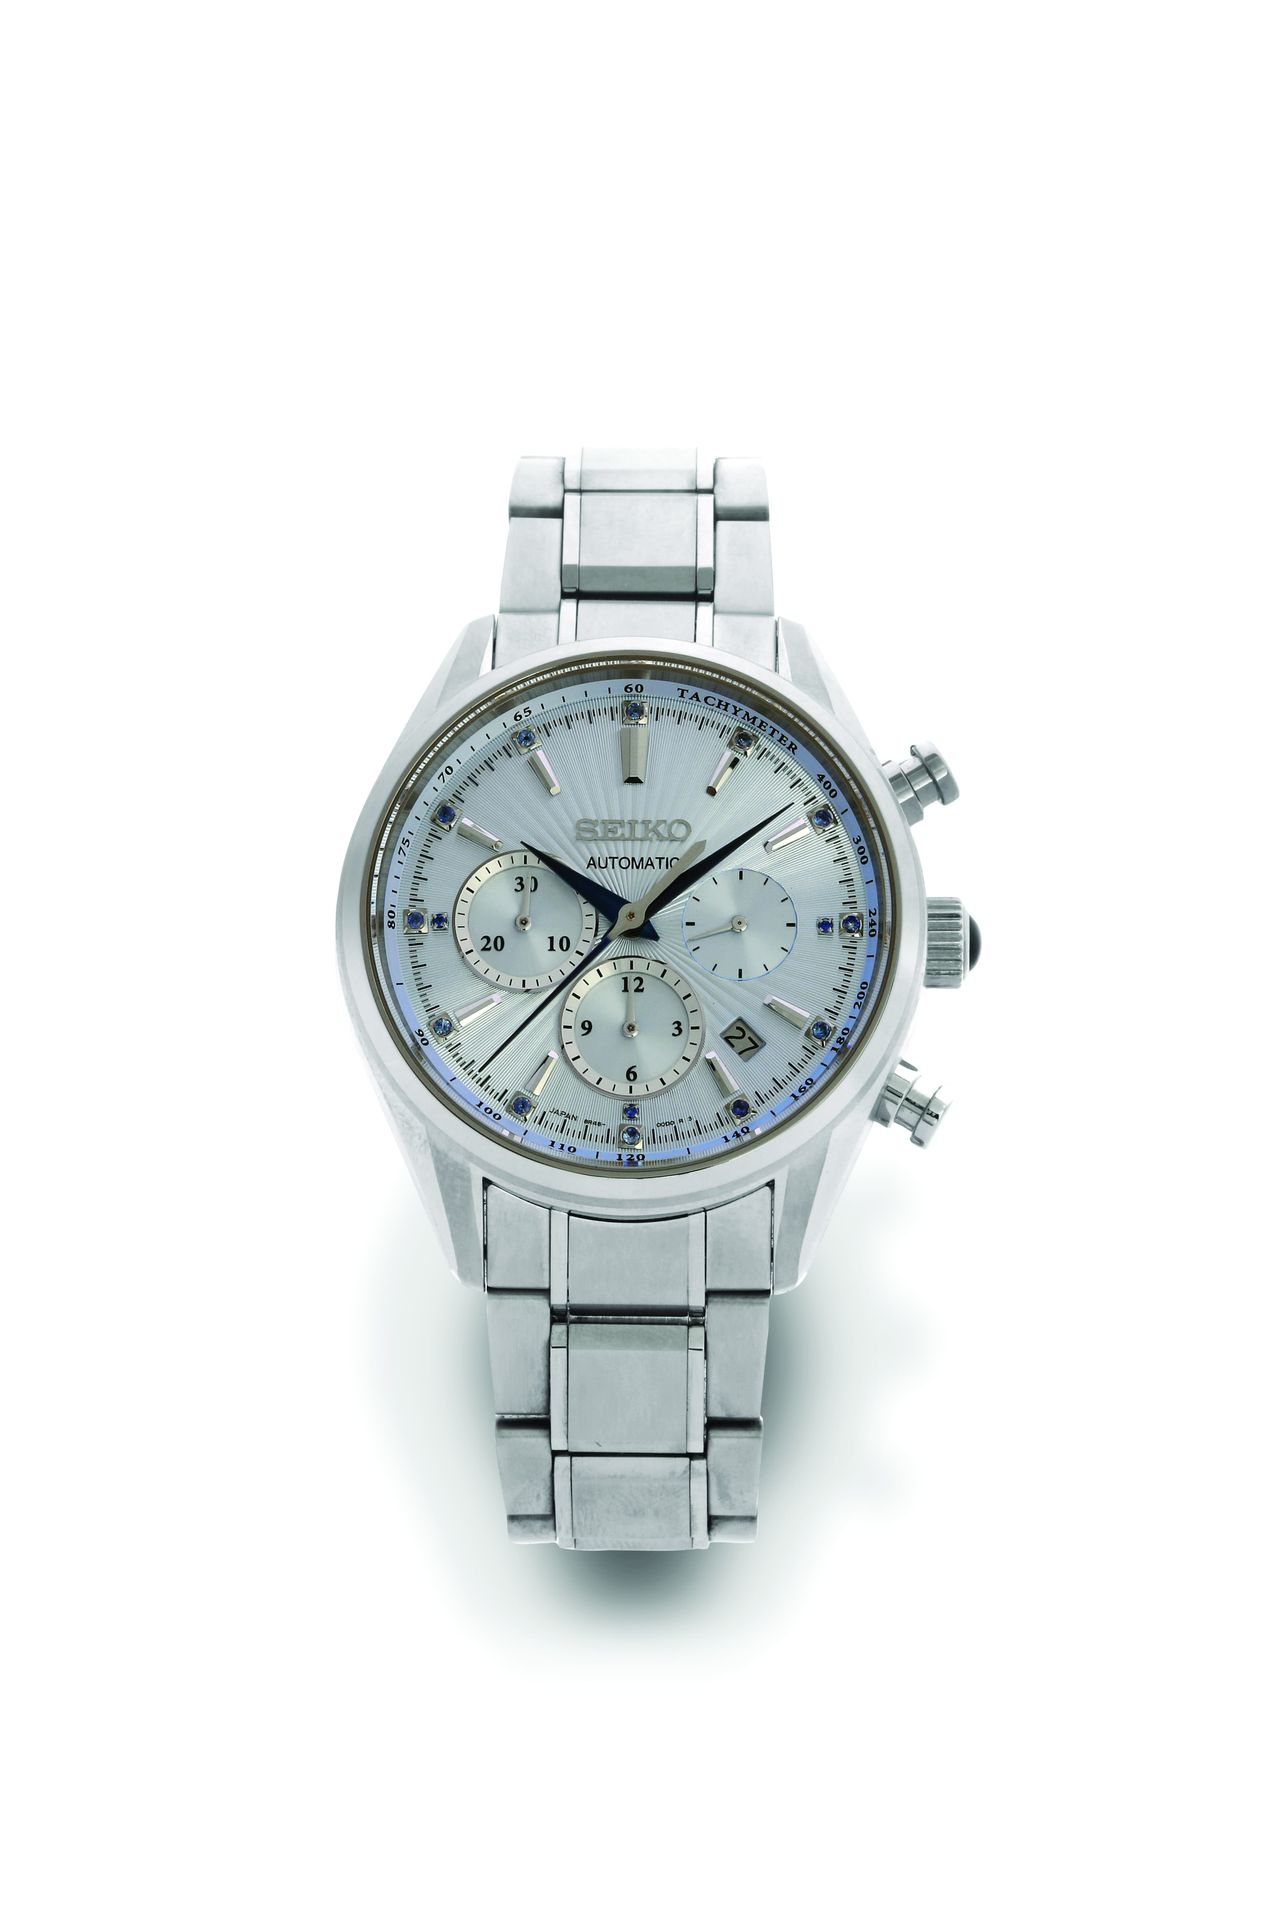 SEIKO Limited edition chronograph
Titanium sports chronograph watch with automat&hellip;